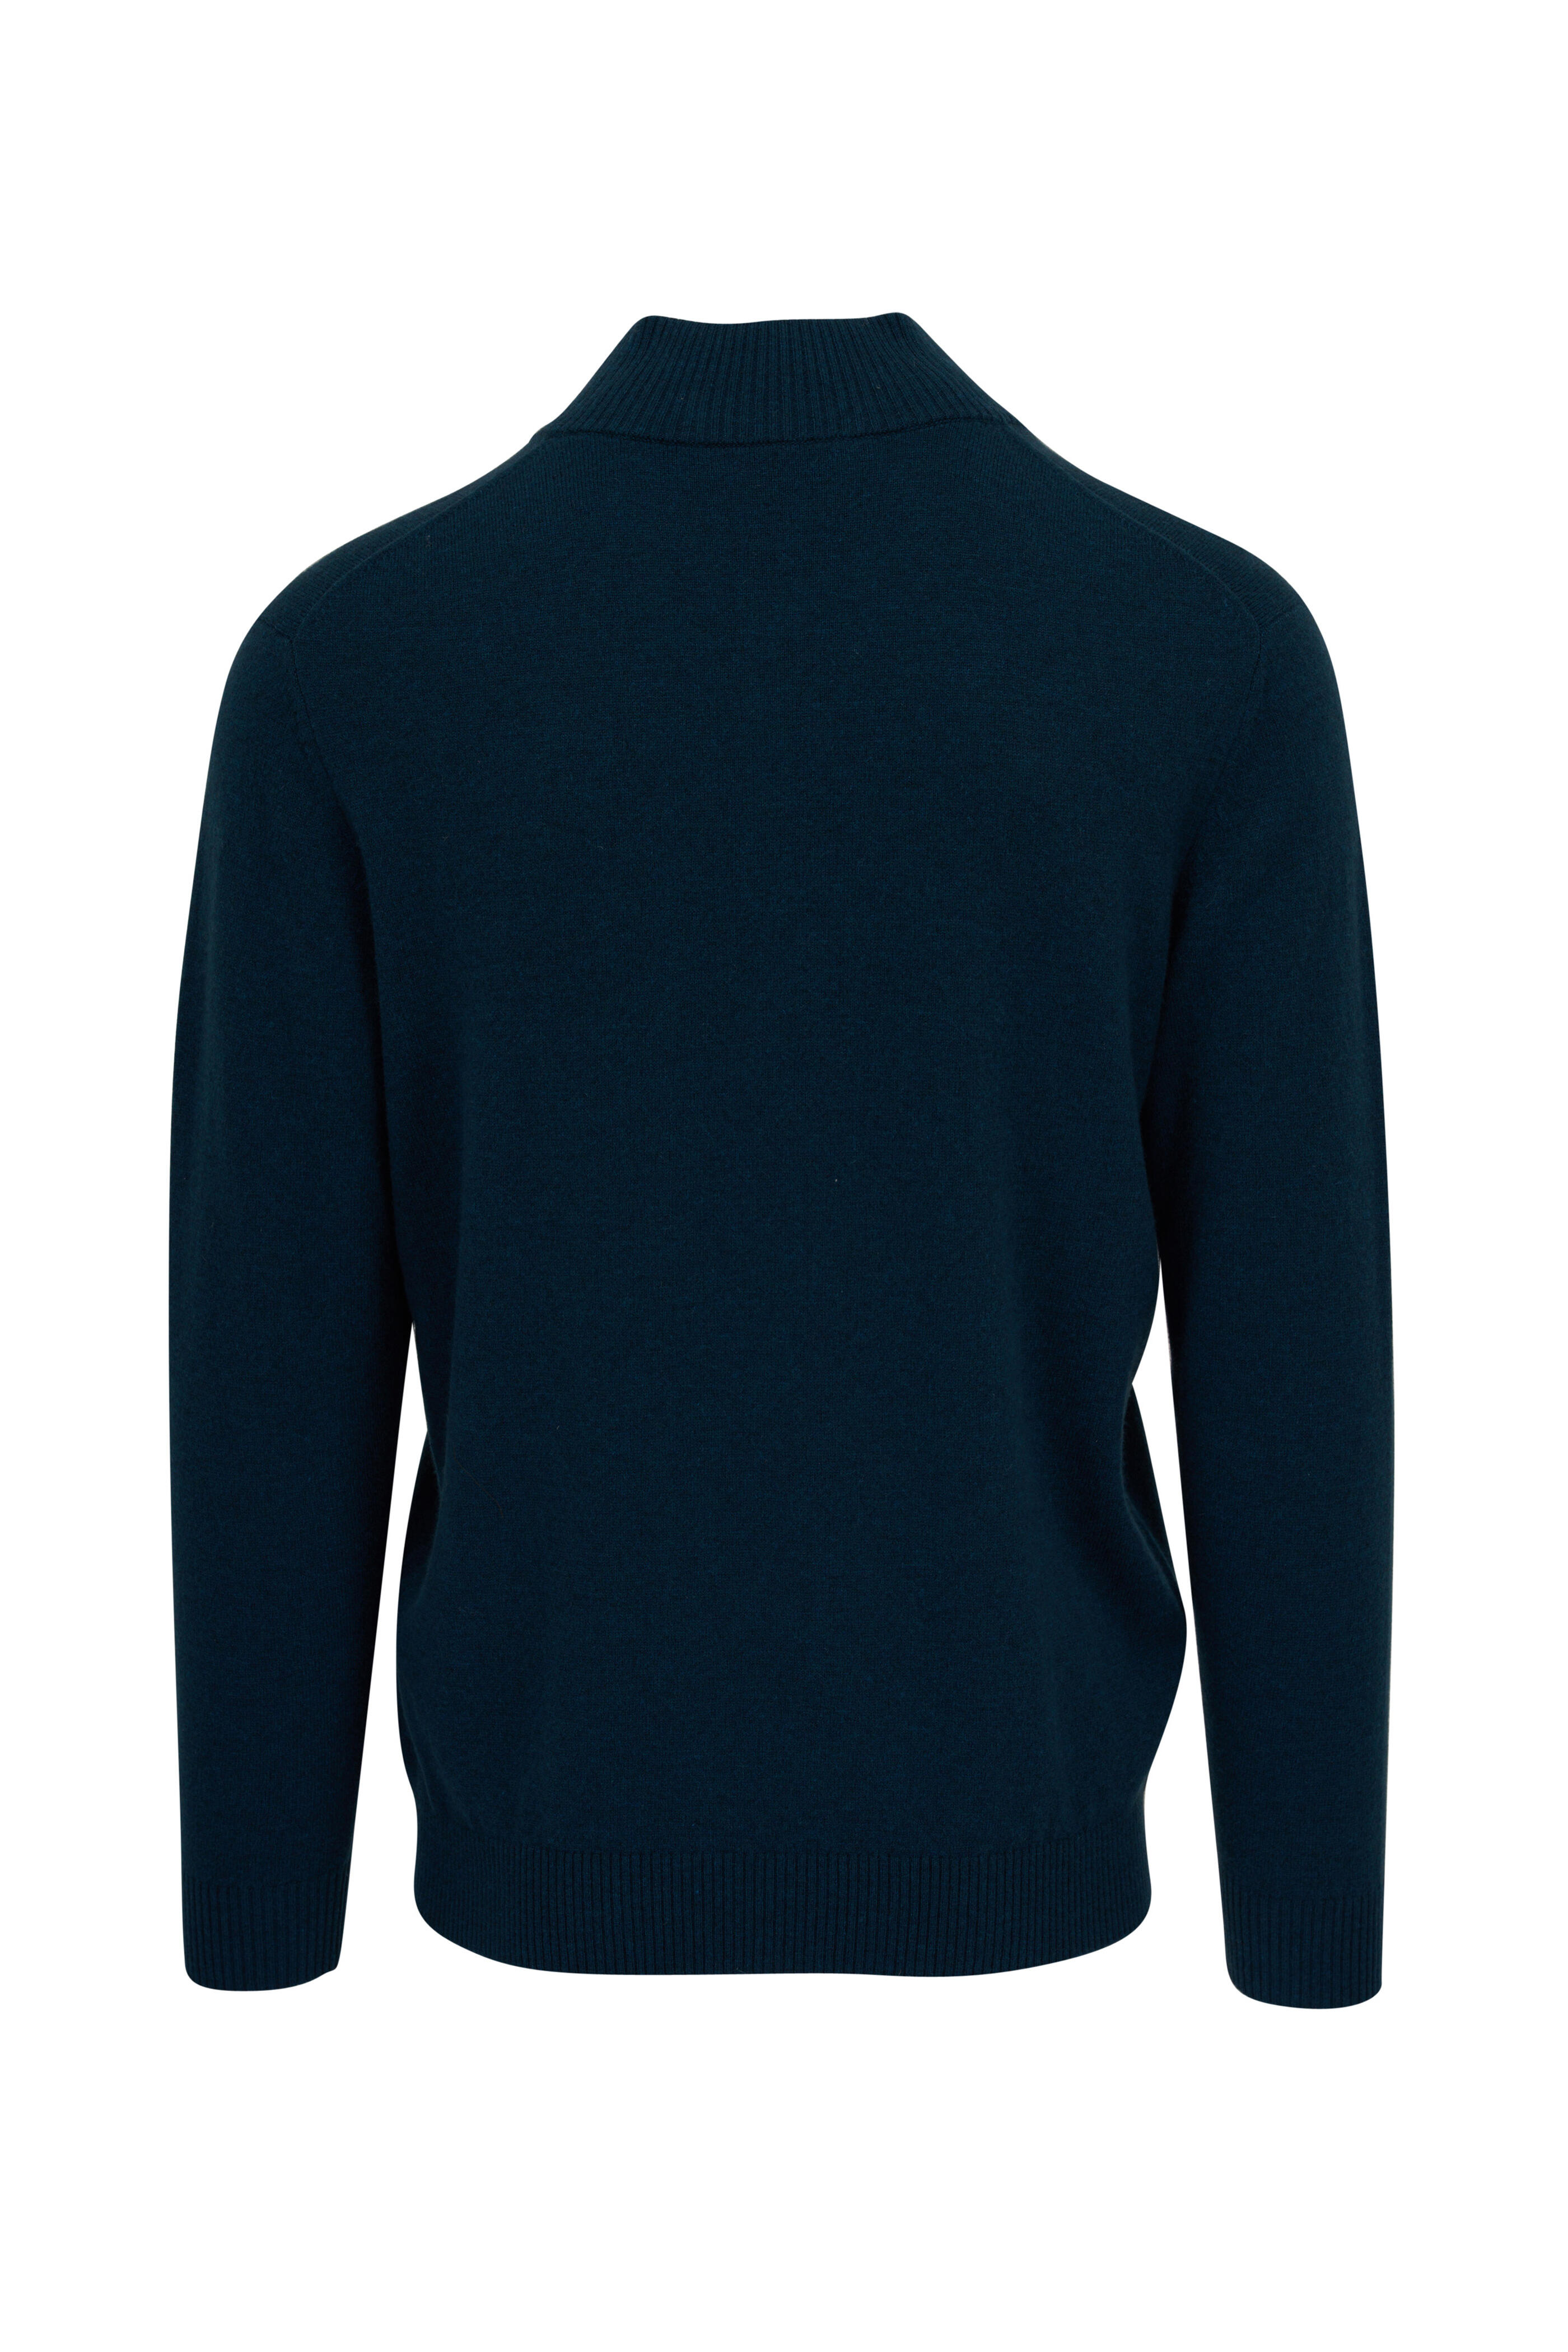 Kinross - Teal Suede Trim Quarter Zip Pullover | Mitchell Stores